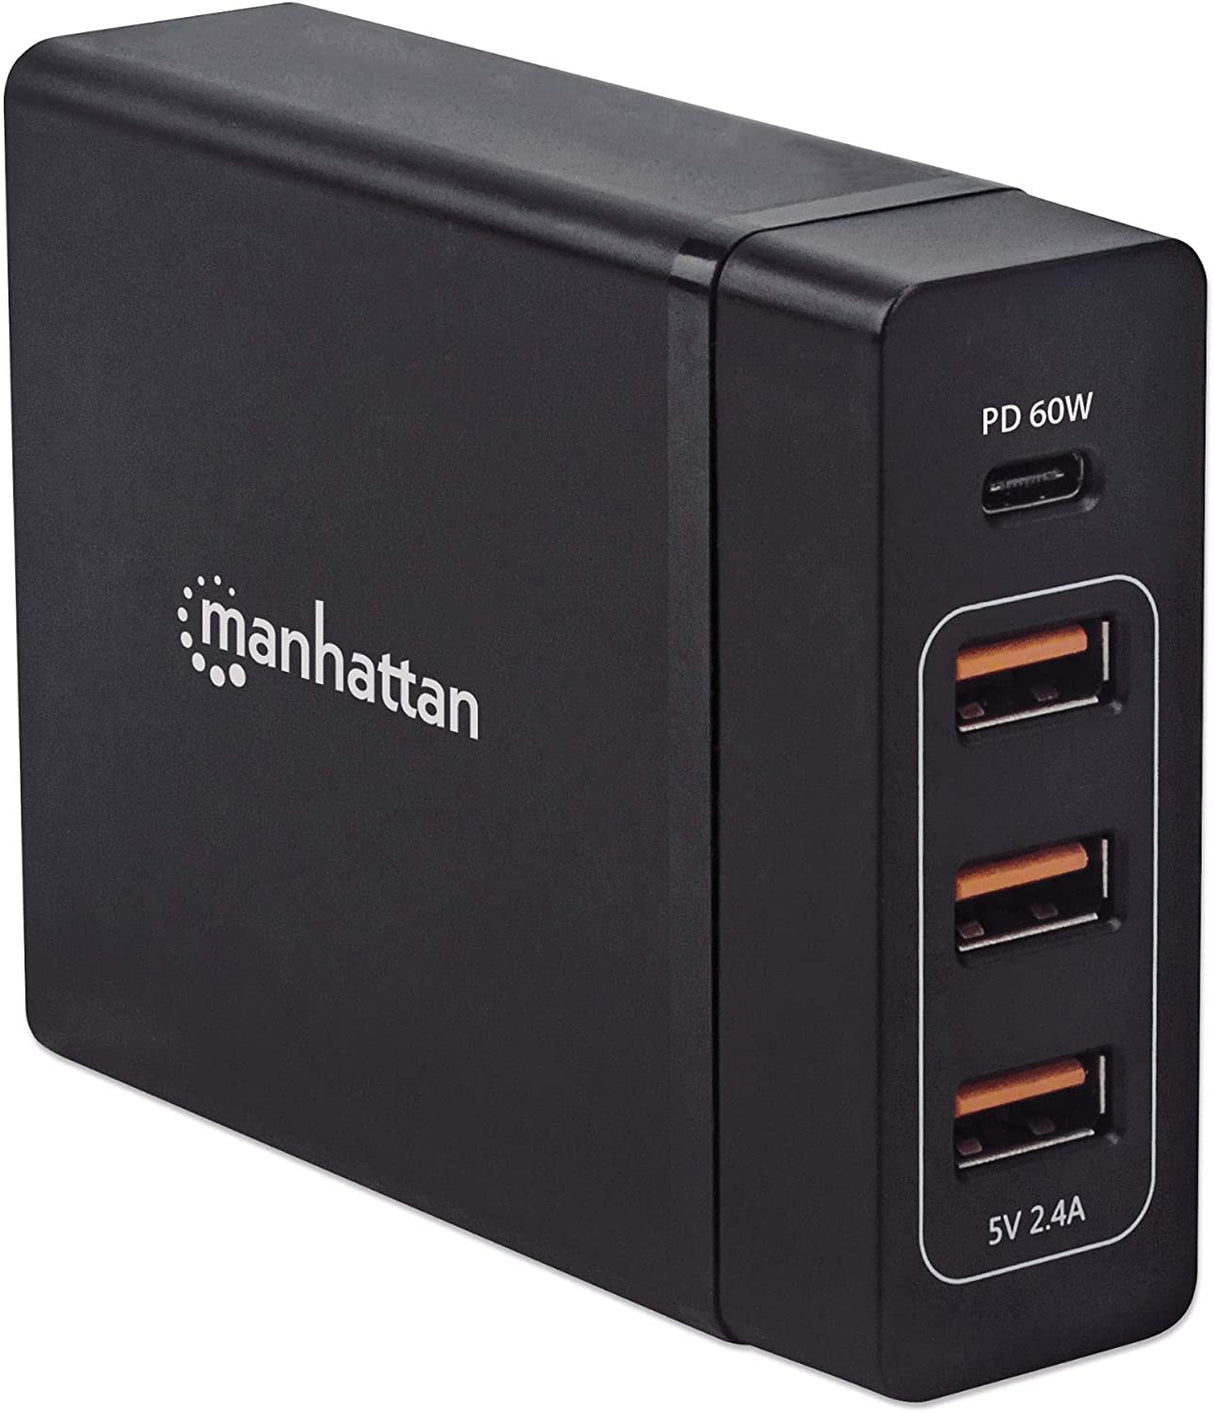 Manhattan 72 W 4-Port USB Power Delivery (PD) Charging Station with One 60 W USB-C PD 3.0 Port, Three USB-A Ports sharing 12 W / 2.4 A and Detachable Plug for Quick Charging a Notebook, Laptop, Smartp